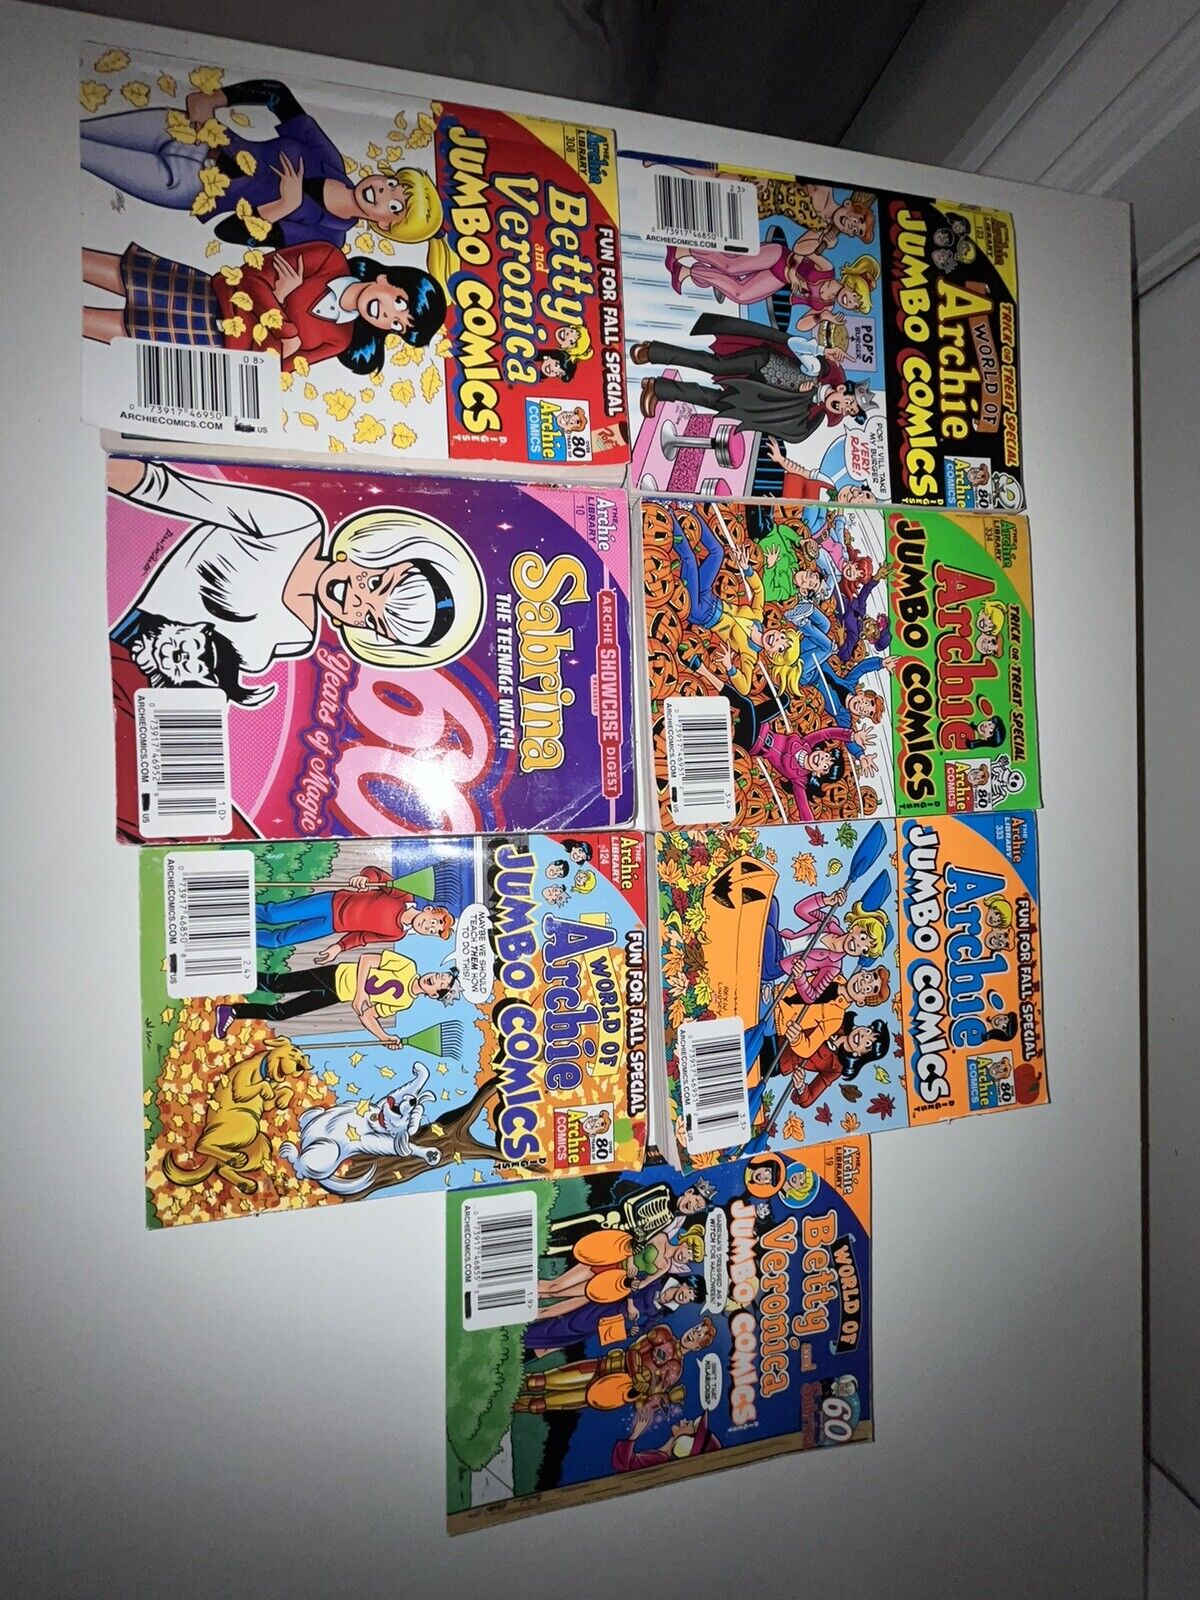 WORLD OF ARCHIE JUMBO COMICS DIRECT MESSAGE ME FOR PRICE ￼NEGOTIATION